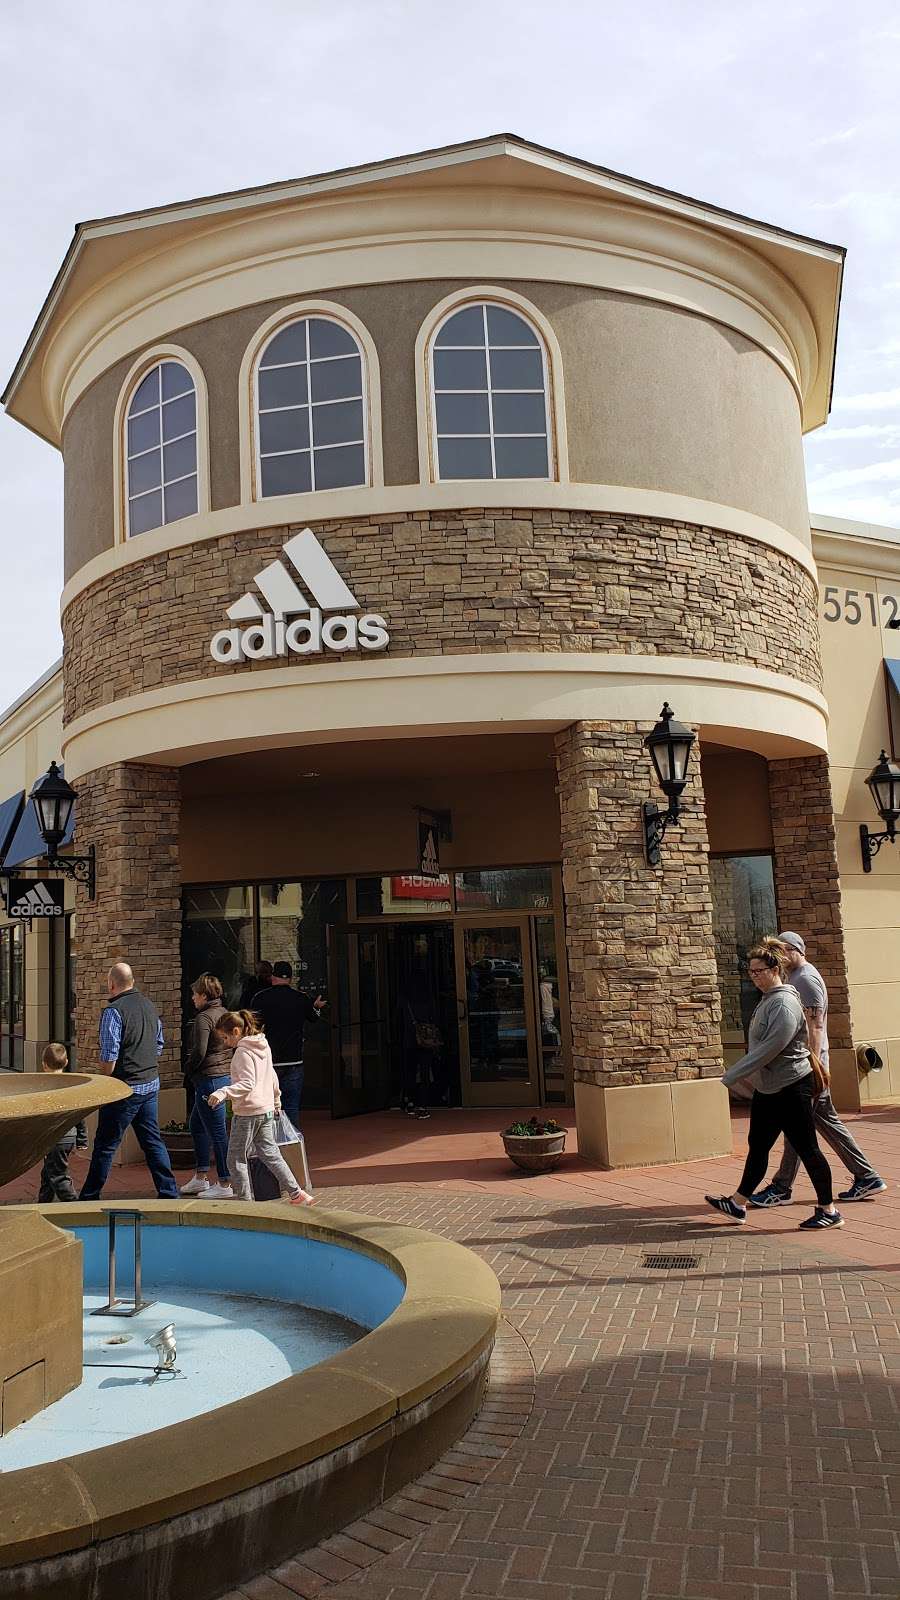 adidas Outlet | 5524 New Fashion Way Suite 1040, Charlotte, NC 28278 | Phone: (704) 587-0544